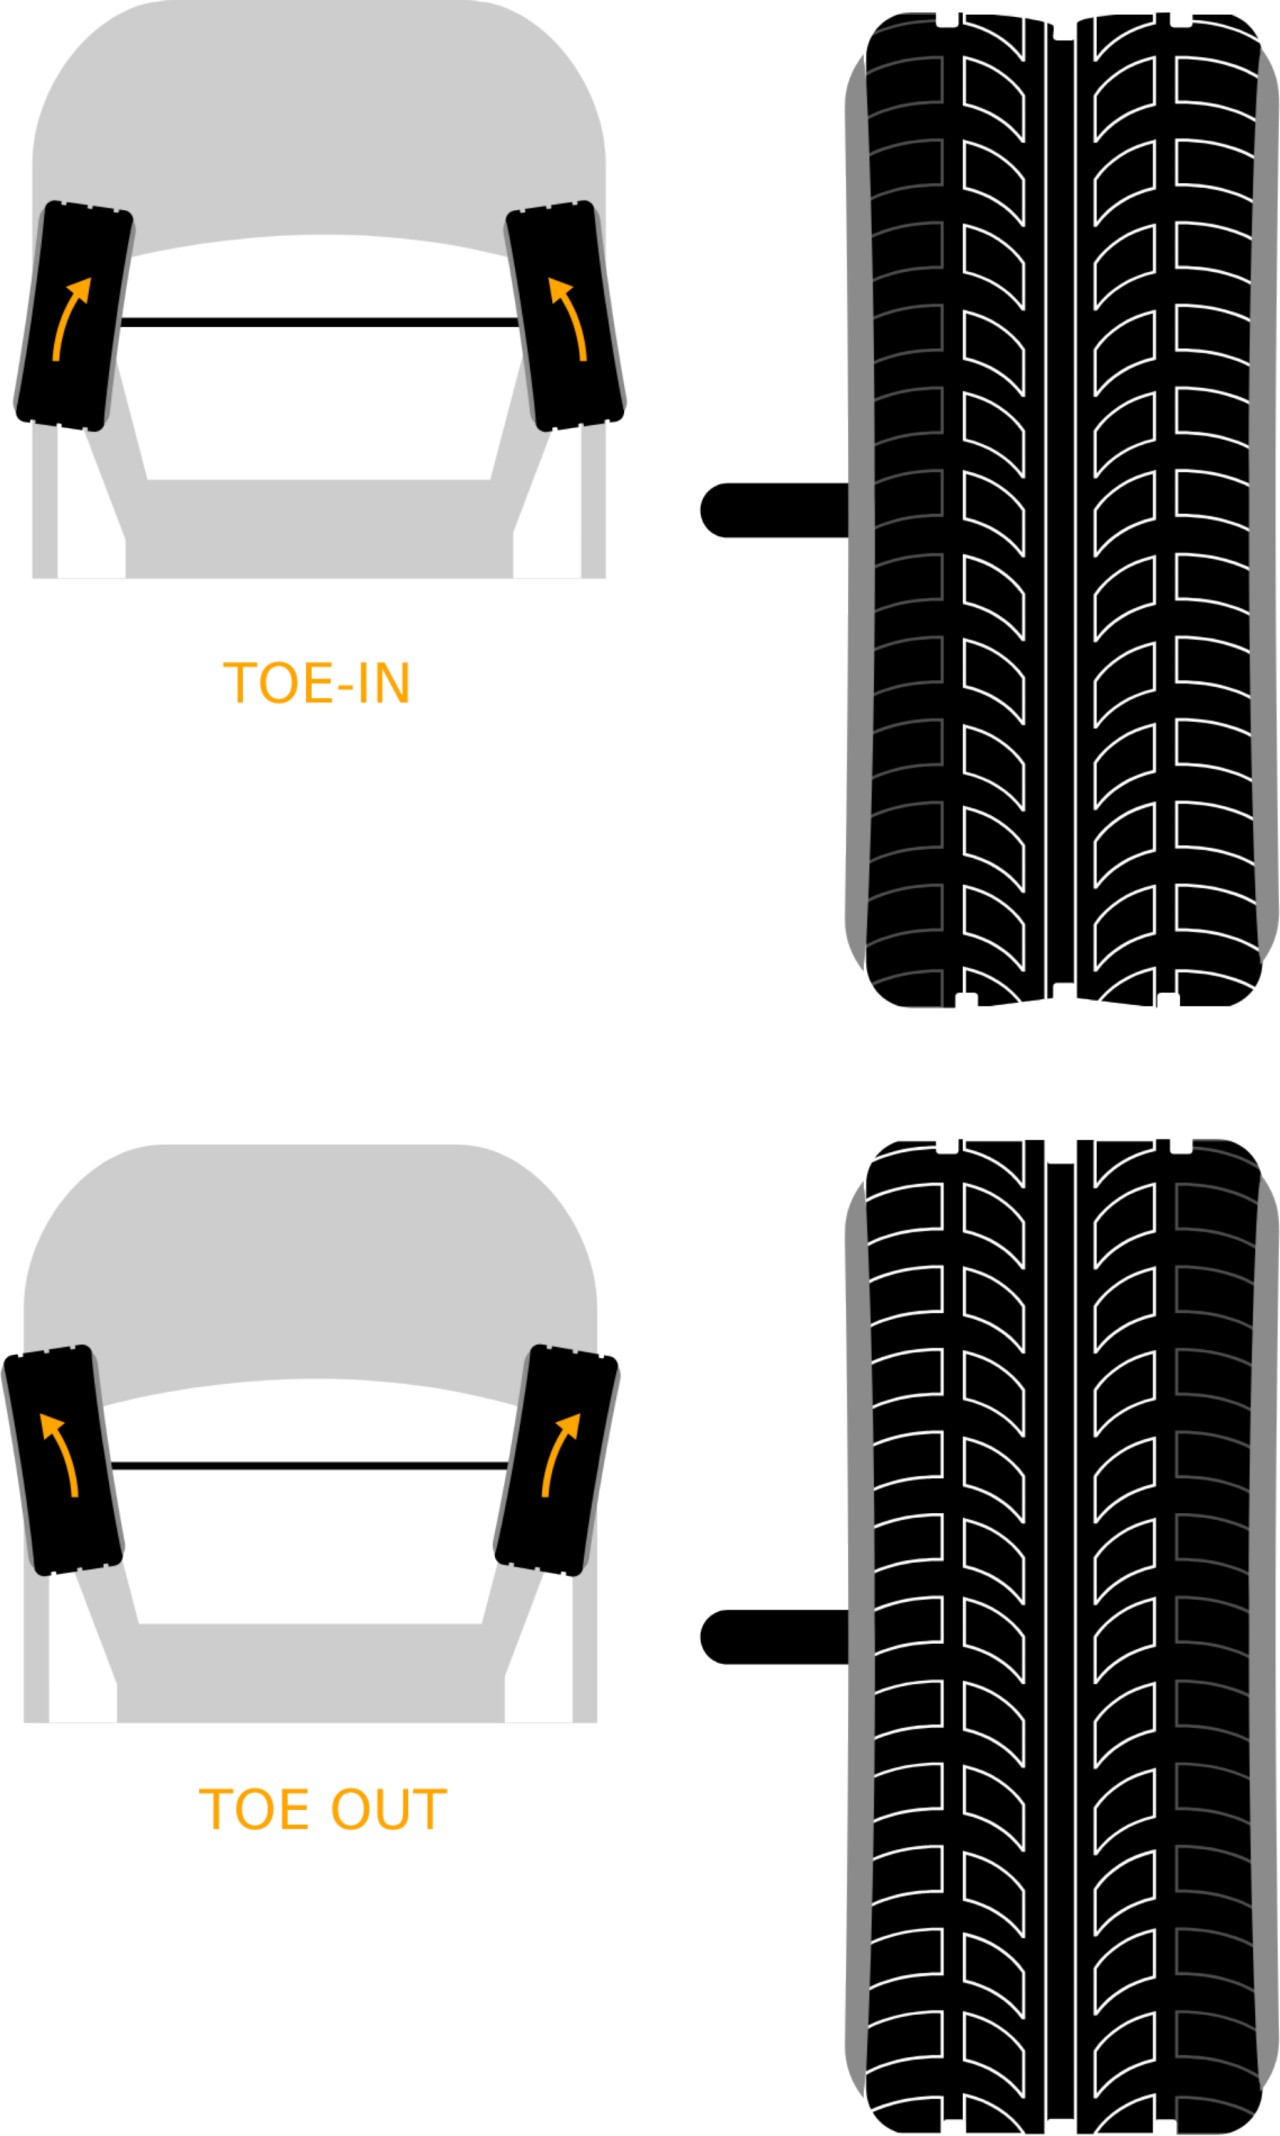 Toe in and toe out are the two types of one sided tire wear.